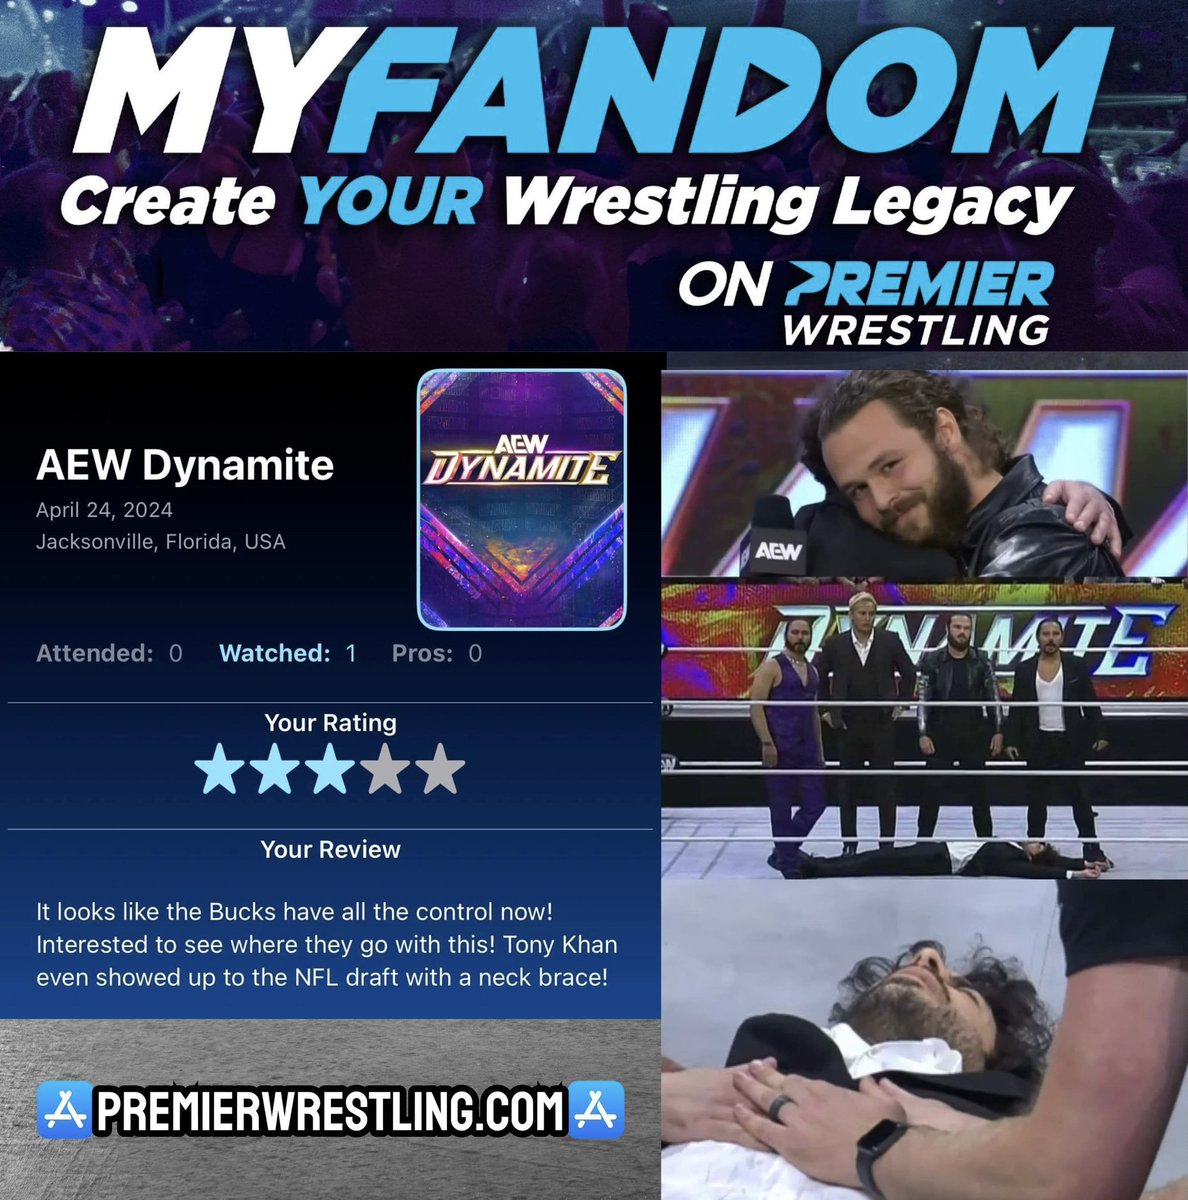 Did you see the chaos that went down on AEW Dynamite?! Tony Khan got taken out by Jack Perry & The Elite! What would you rate AEW Dynamite from this week? Here's your chance! Go to #MyFandom, Add this past week's event to 'WATCHED' and leave your review and tell the world what…